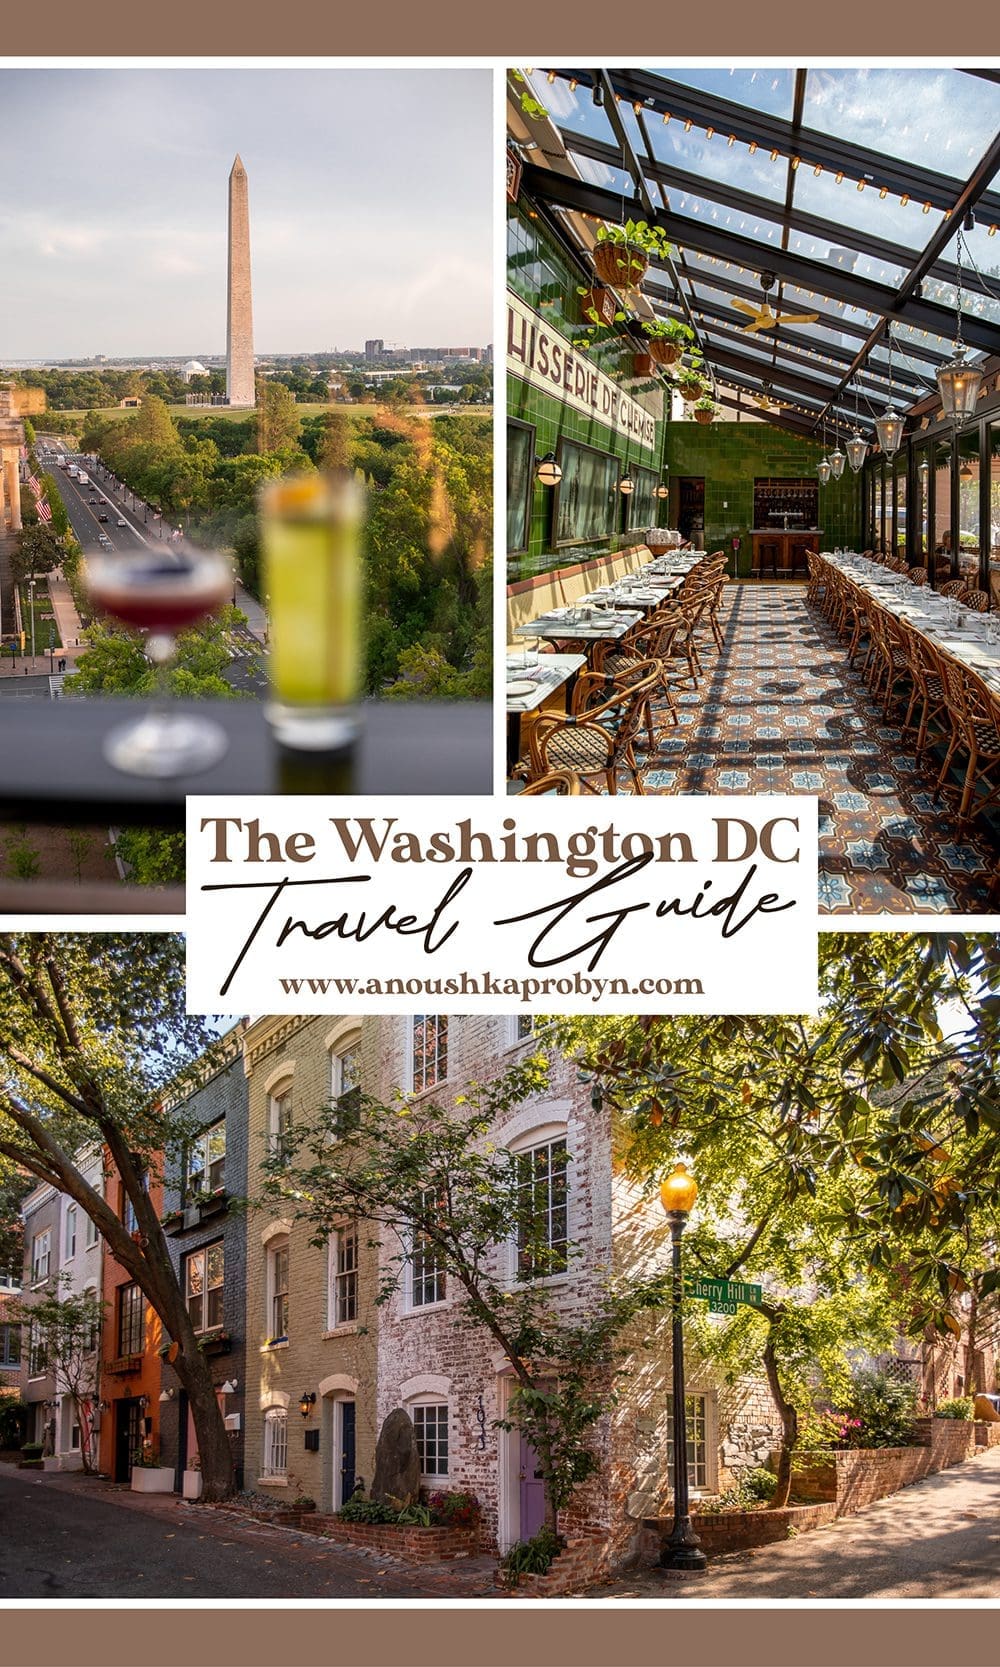 Washington DC Travel Guide Things to Do, Restaurants, Tips and Advice